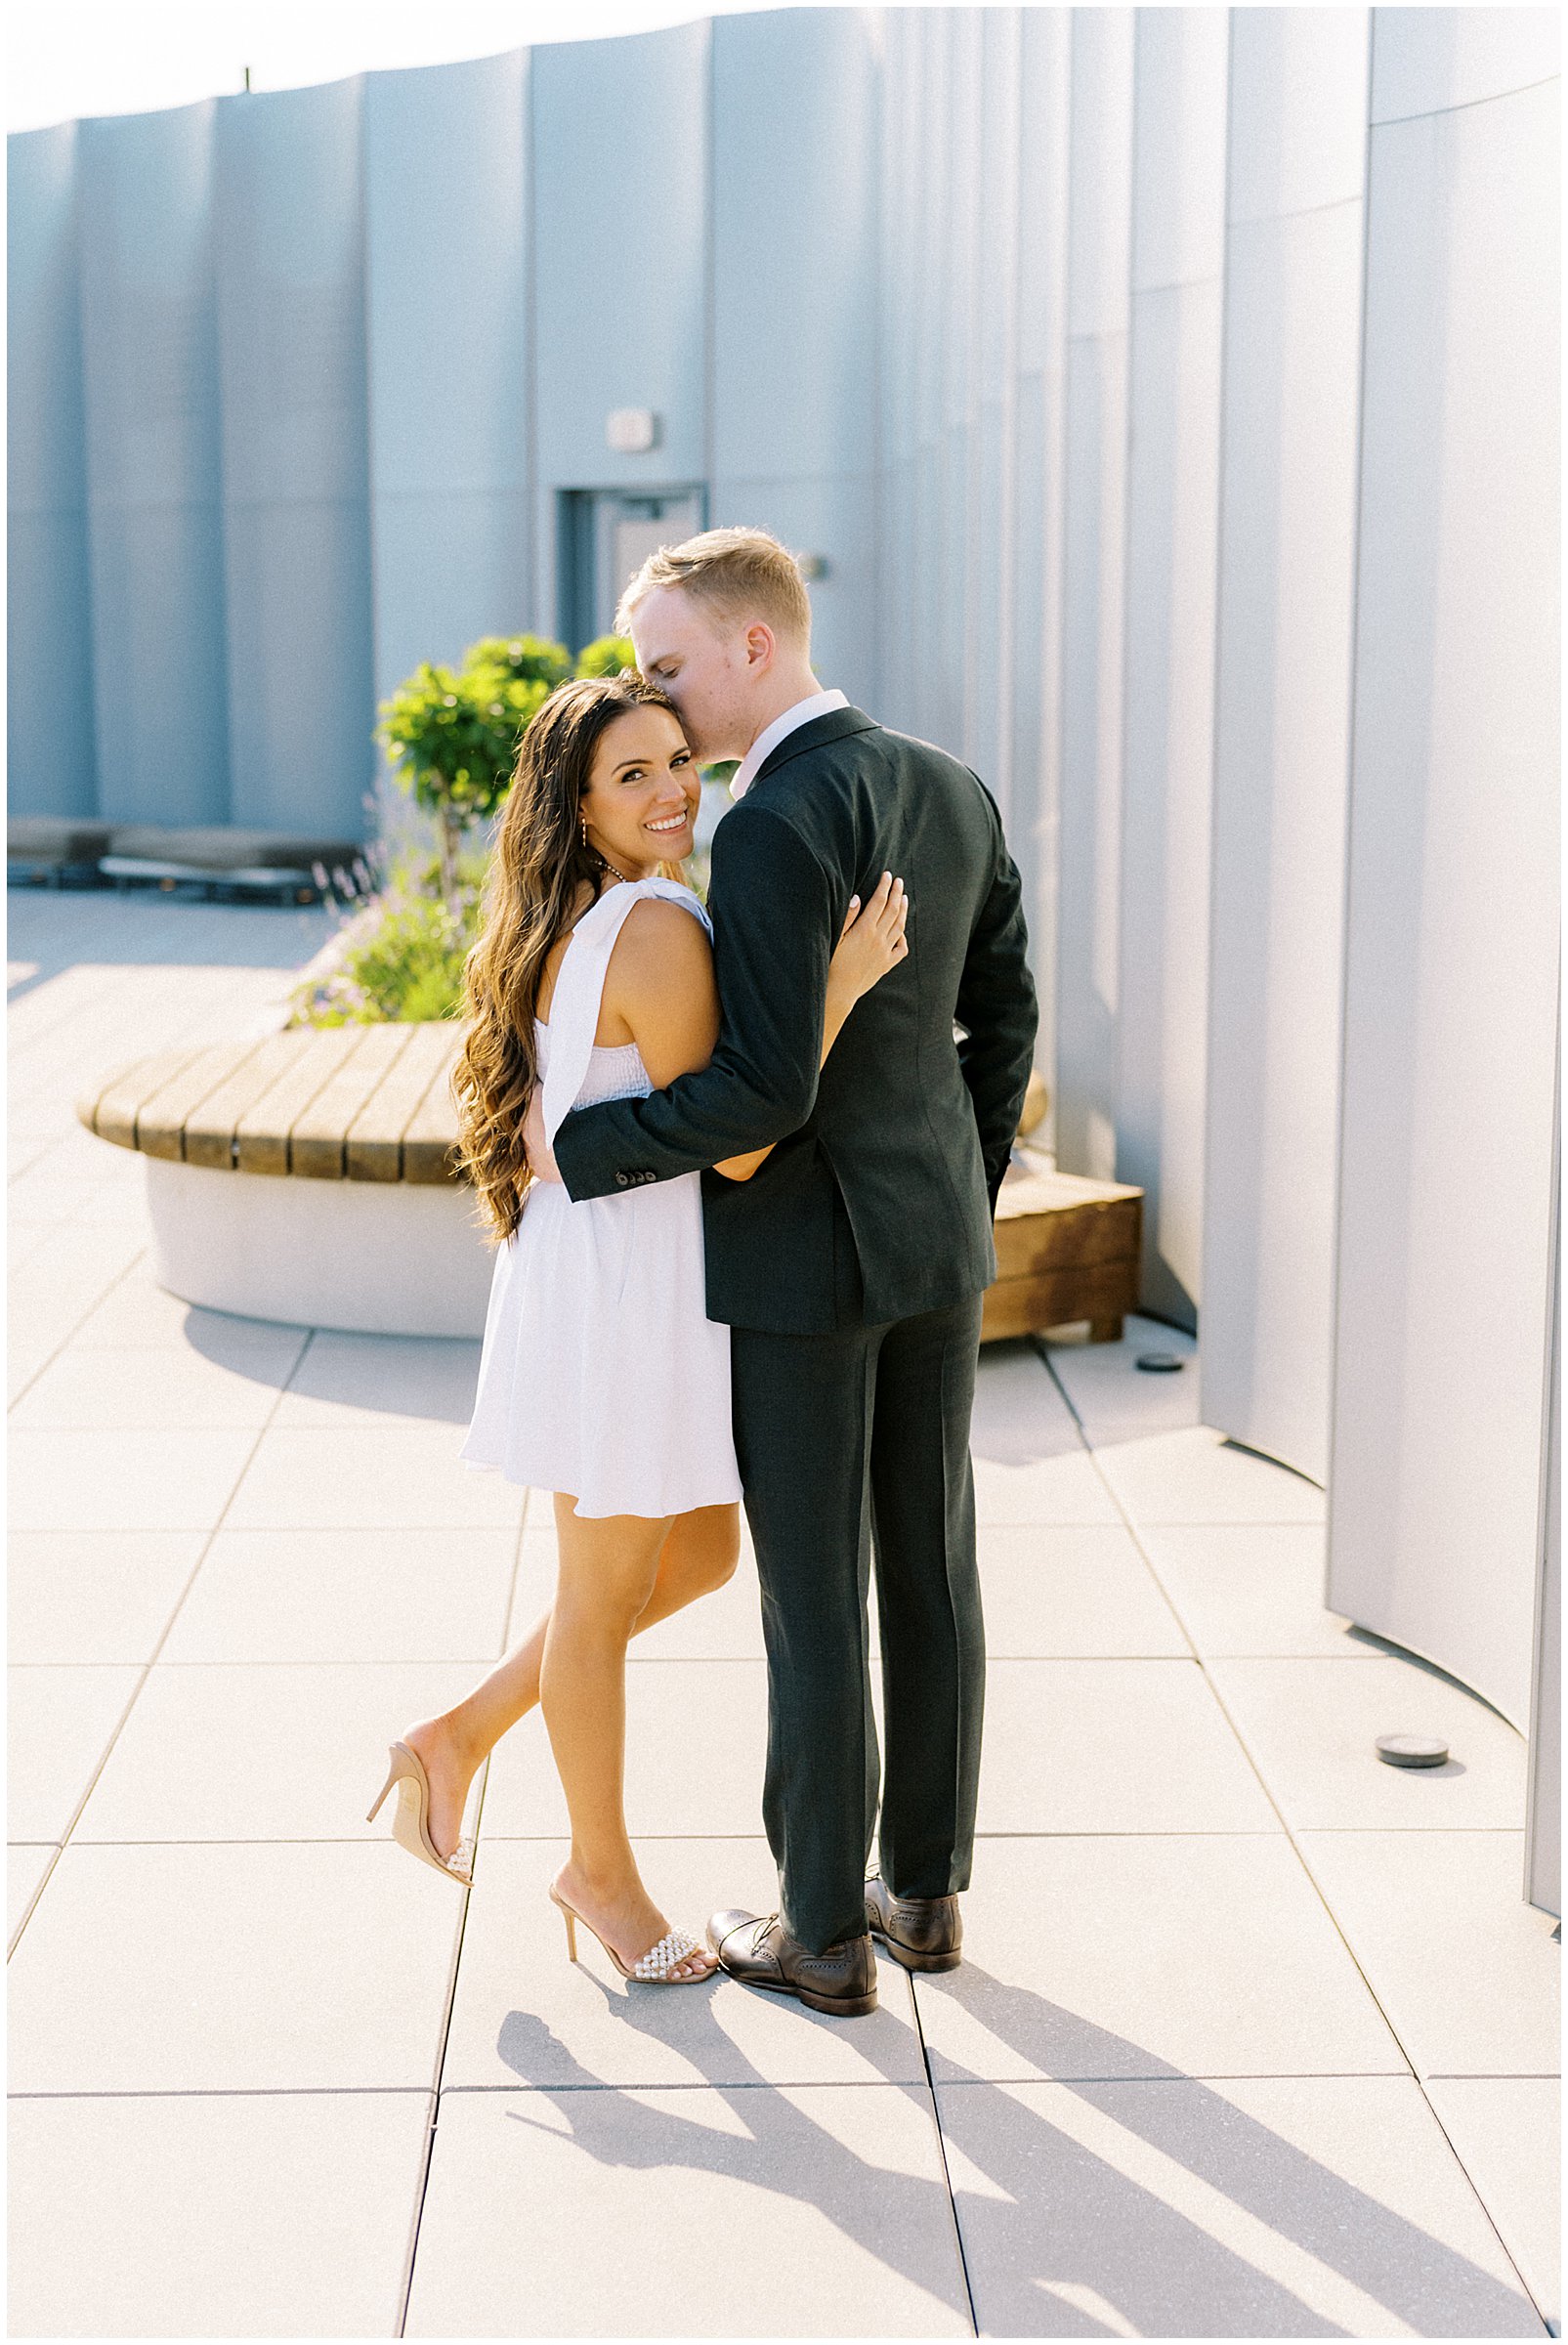 Rooftop engagement photos at the Conrad Hotel in Washington, DC